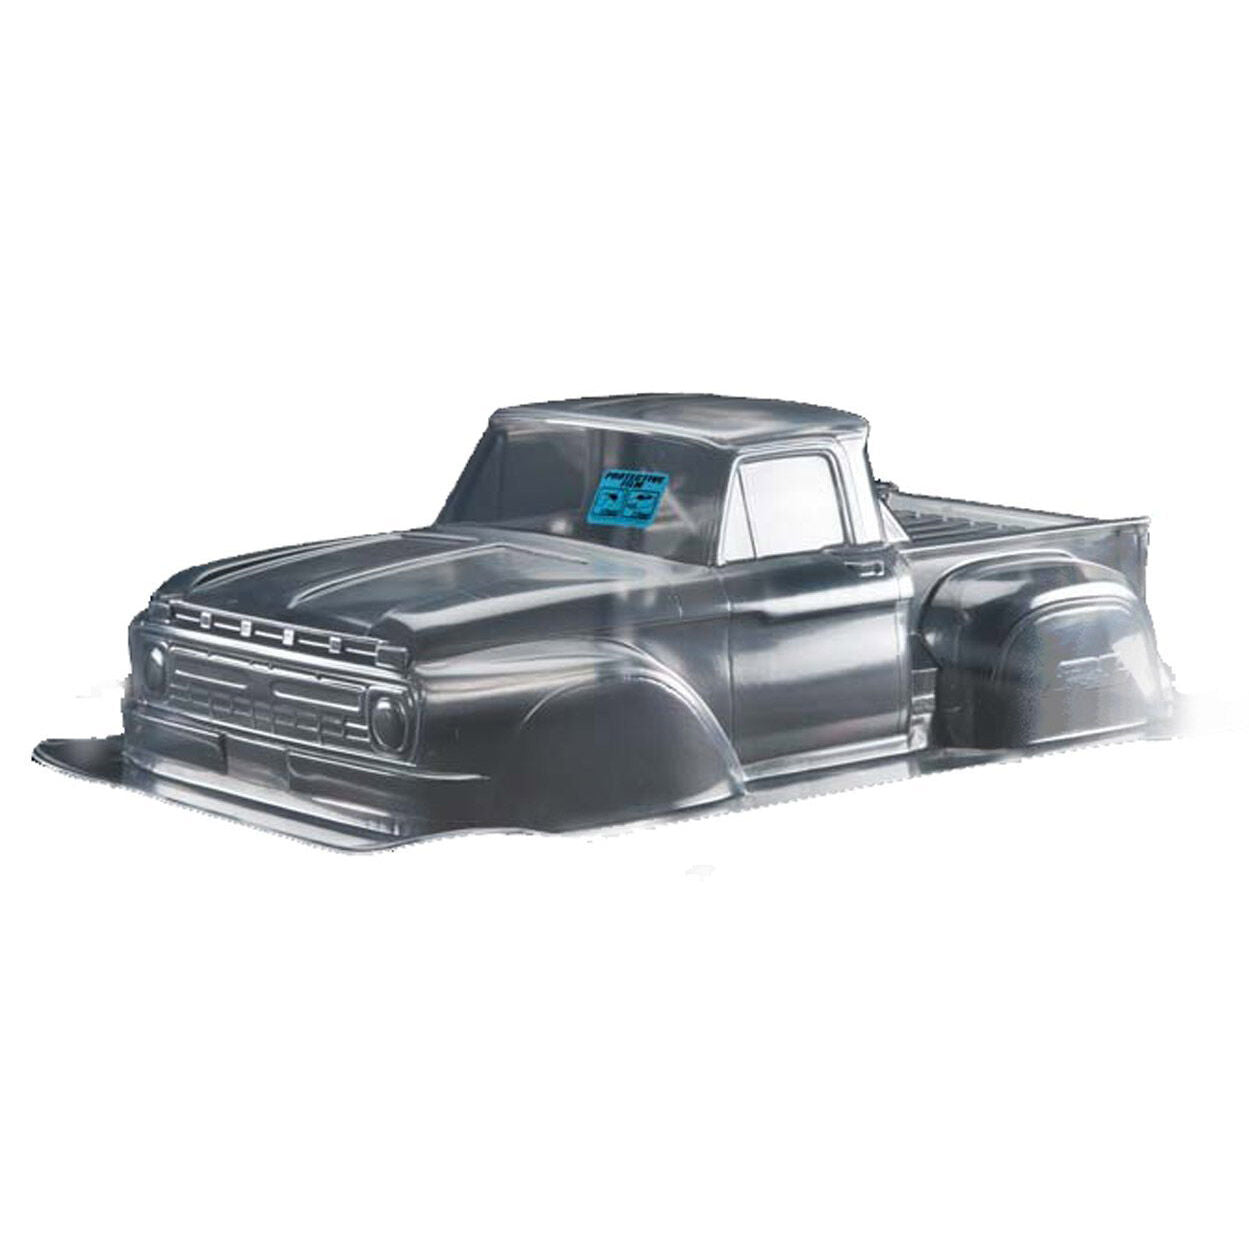 Pro-Line® 1/10 1966 Ford F-100 Clear Body: Short Course